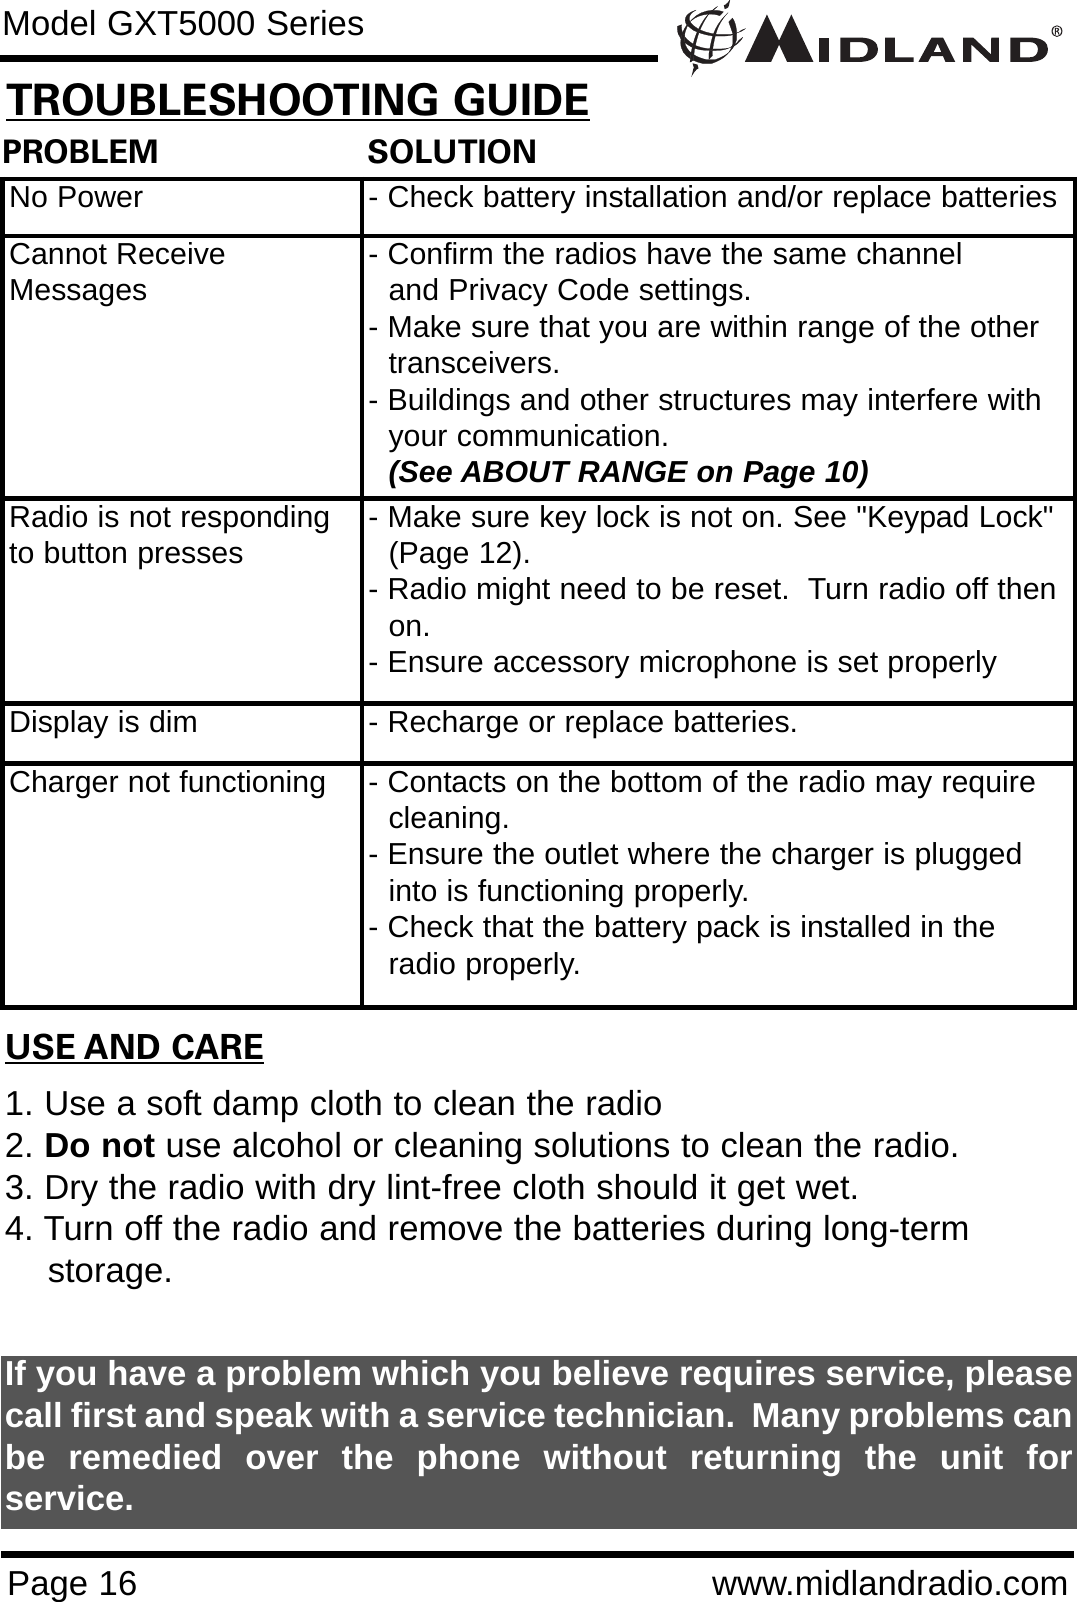 Page 16 www.midlandradio.comPROBLEM                     SOLUTIONNo Power - Check battery installation and/or replace batteriesCannot ReceiveMessages - Confirm the radios have the same channel      and Privacy Code settings.- Make sure that you are within range of the other transceivers.- Buildings and other structures may interfere with your communication. (See ABOUT RANGE on Page 10)Radio is not respondingto button presses - Make sure key lock is not on. See &quot;Keypad Lock&quot; (Page 12).- Radio might need to be reset.  Turn radio off then on.- Ensure accessory microphone is set properlyDisplay is dim - Recharge or replace batteries.Charger not functioning - Contacts on the bottom of the radio may require cleaning. - Ensure the outlet where the charger is plugged into is functioning properly.- Check that the battery pack is installed in the radio properly.USE AND CARE1. Use a soft damp cloth to clean the radio2. Do not use alcohol or cleaning solutions to clean the radio.3. Dry the radio with dry lint-free cloth should it get wet.4. Turn off the radio and remove the batteries during long-term    storage.If you have a problem which you believe requires service, pleasecall first and speak with a service technician.  Many problems canbe remedied over the phone without returning the unit forservice.Model GXT5000 SeriesTROUBLESHOOTING GUIDE